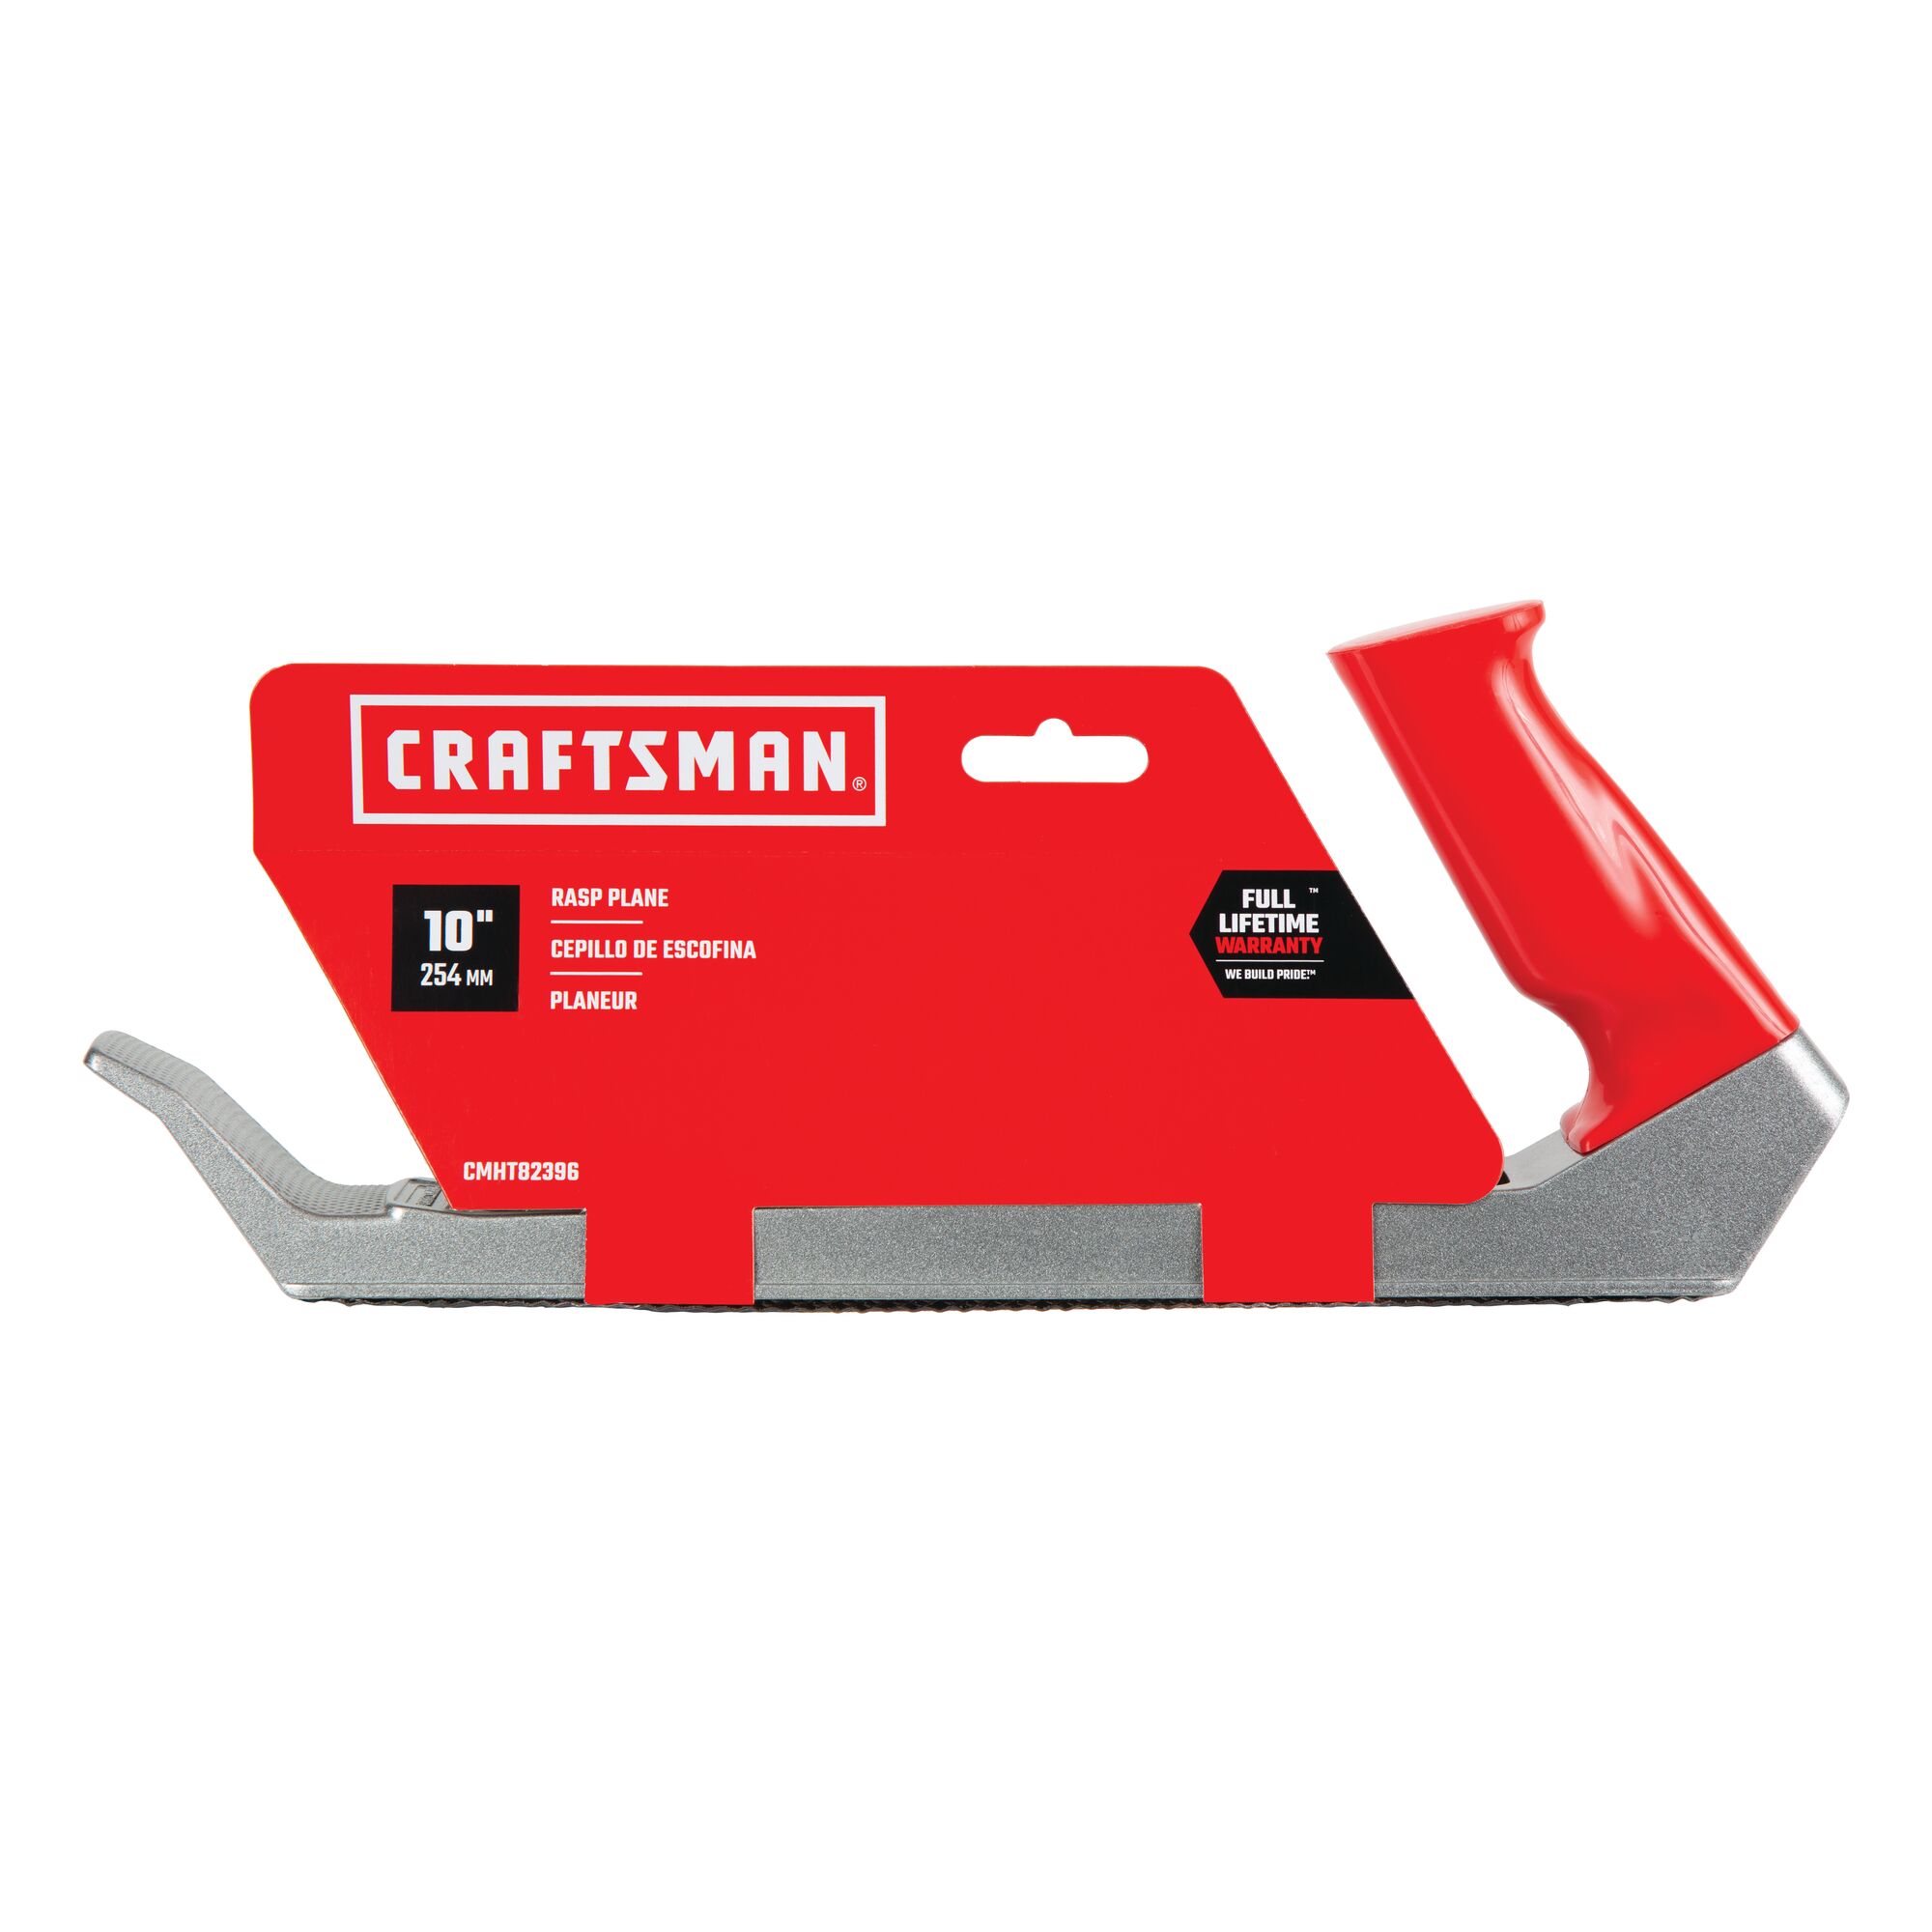 View of CRAFTSMAN Planes & Surform packaging